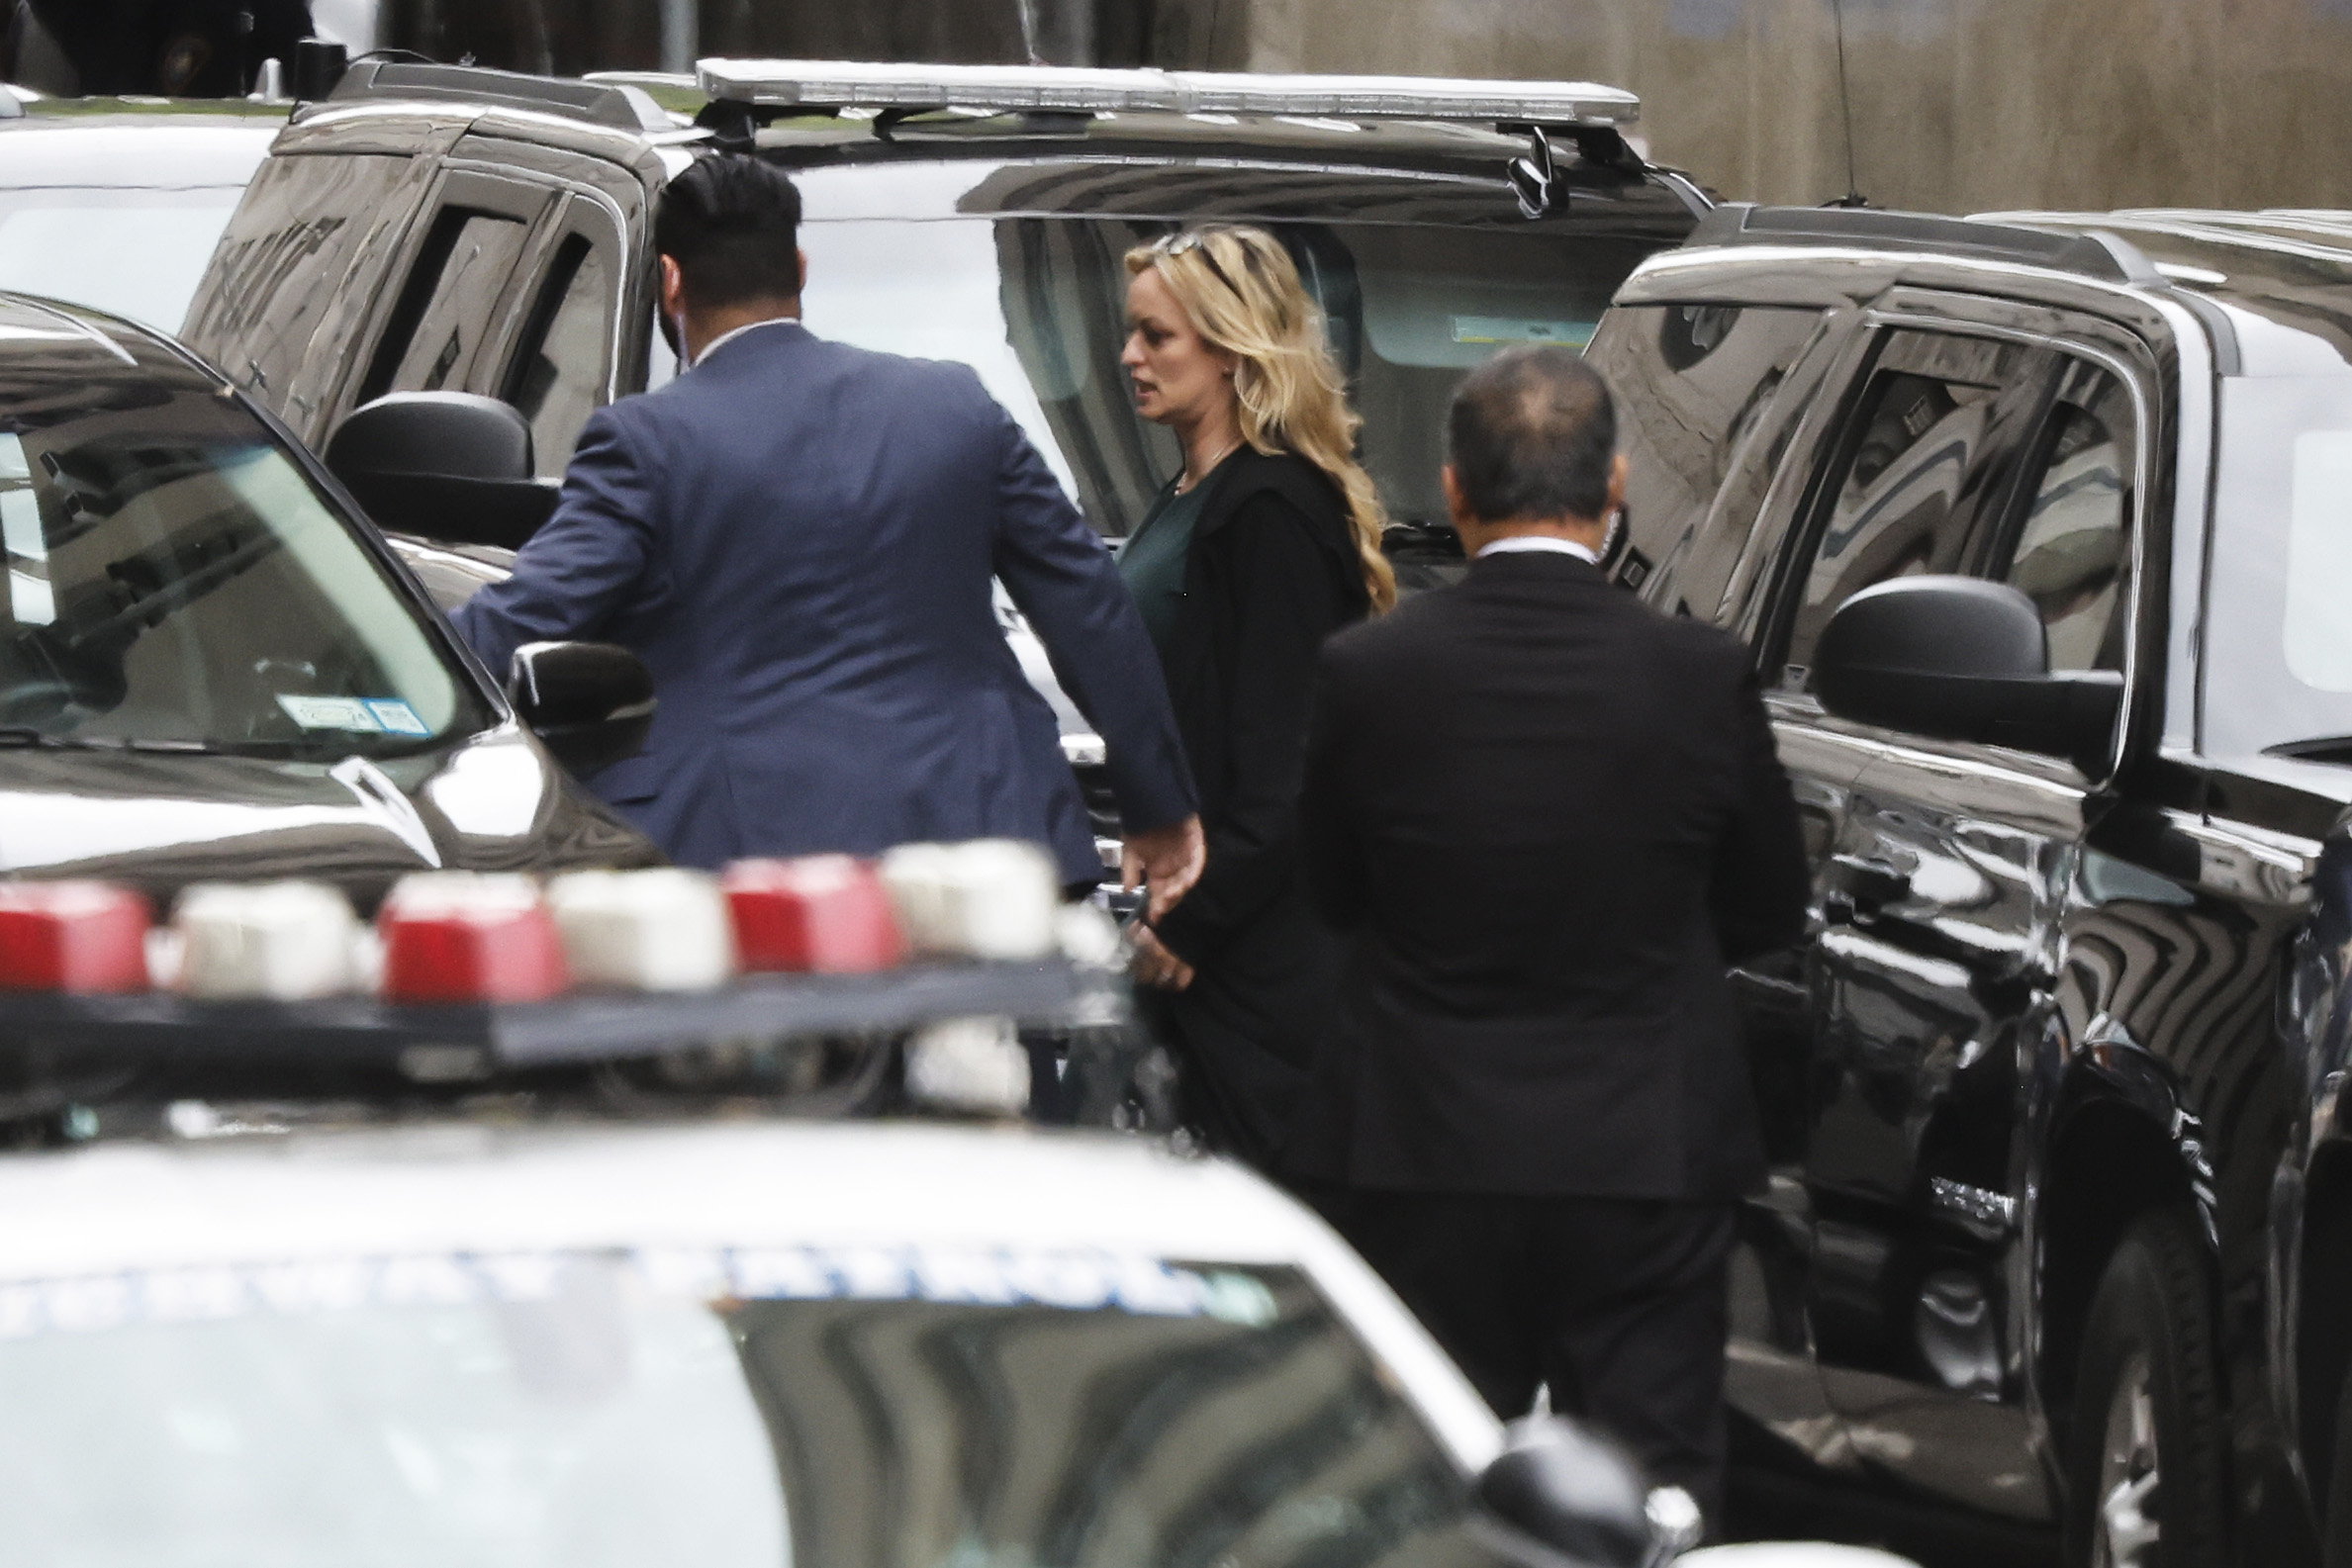 A blonde woman in black walking between parked SUVs with two men in suits.